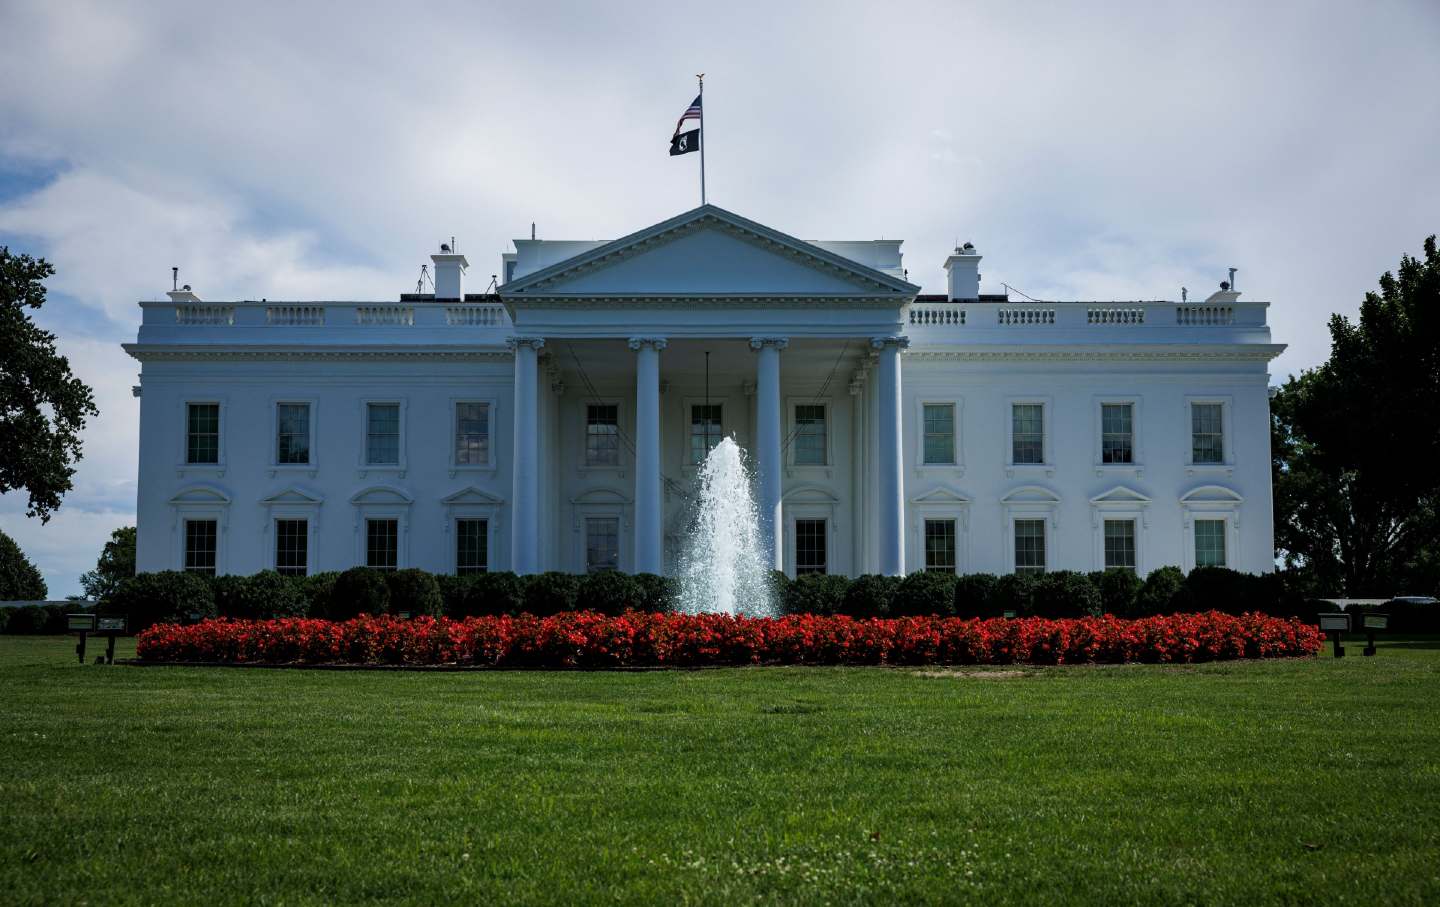 A saturated, dark photo of the White House. The fountain is bright against the red bushes and green grass.